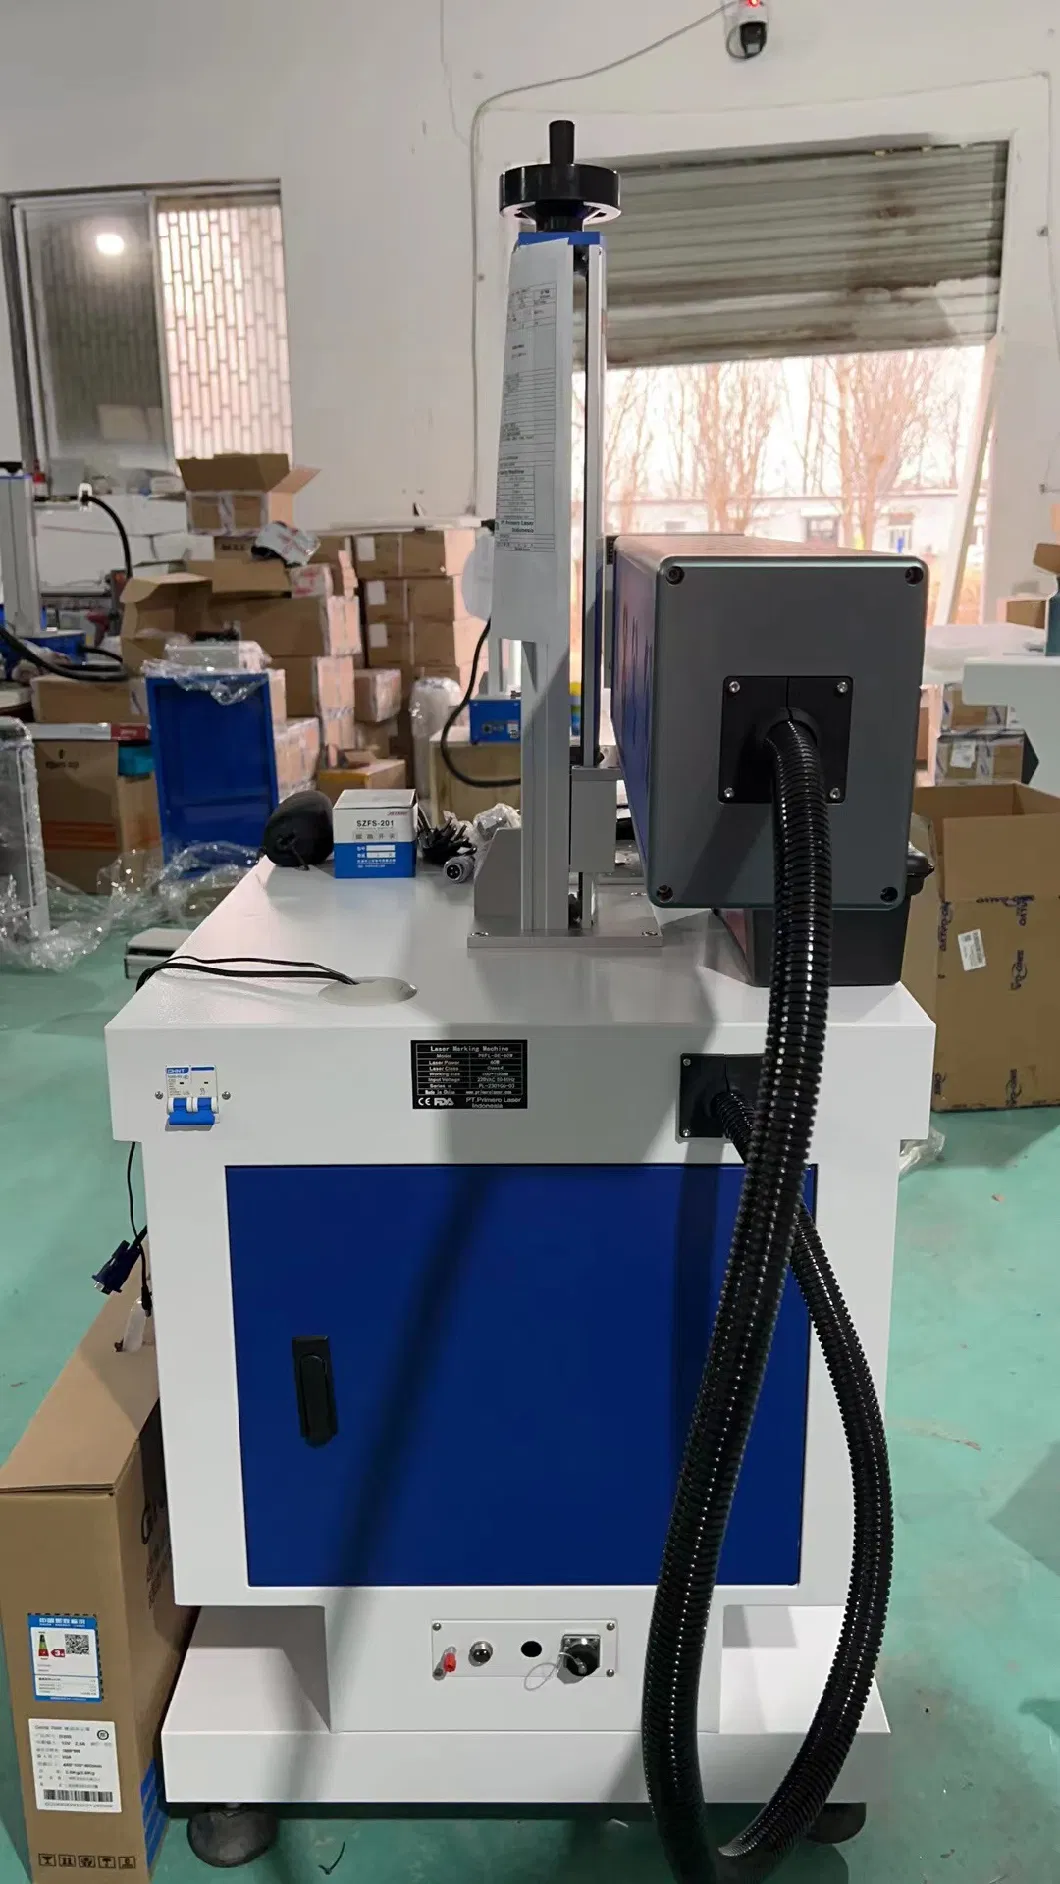 Nanjing Crd Nanjing Bost 30W 40W 60W 100W Optical Split Design, Wood and Leather Marking with Bost Laser Source Nanjing Crd Cr30, CO2 Laser Marking Machine